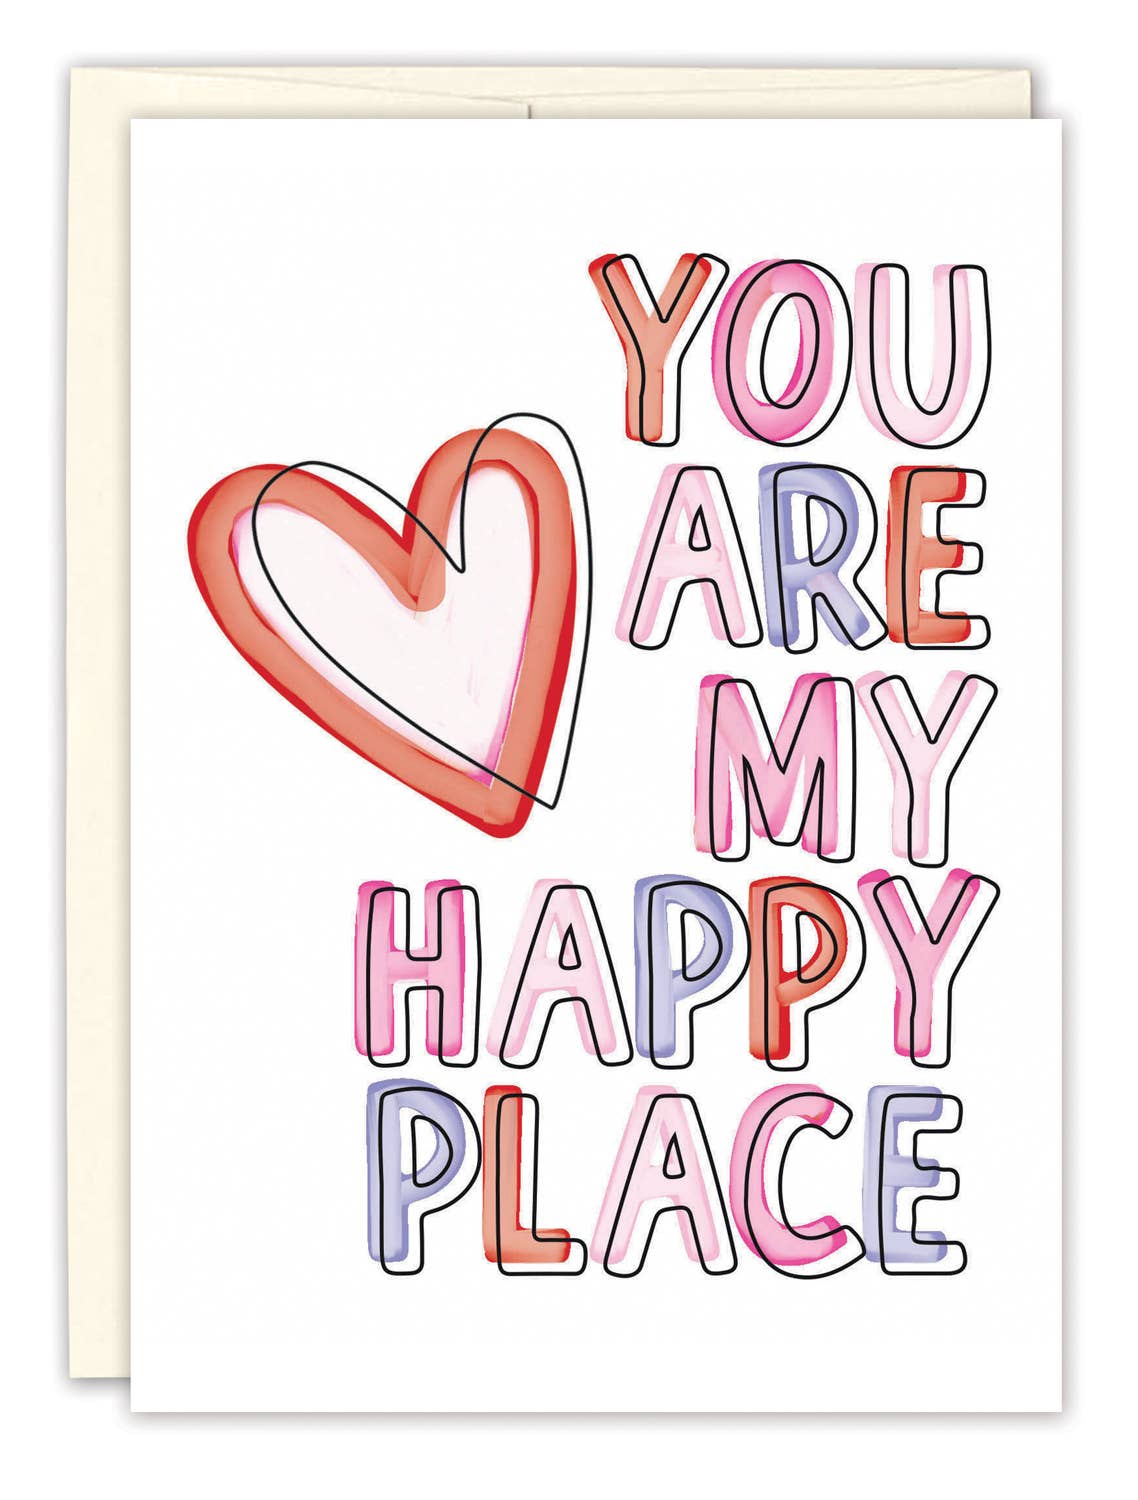 Happy Place Valentine's Day Card